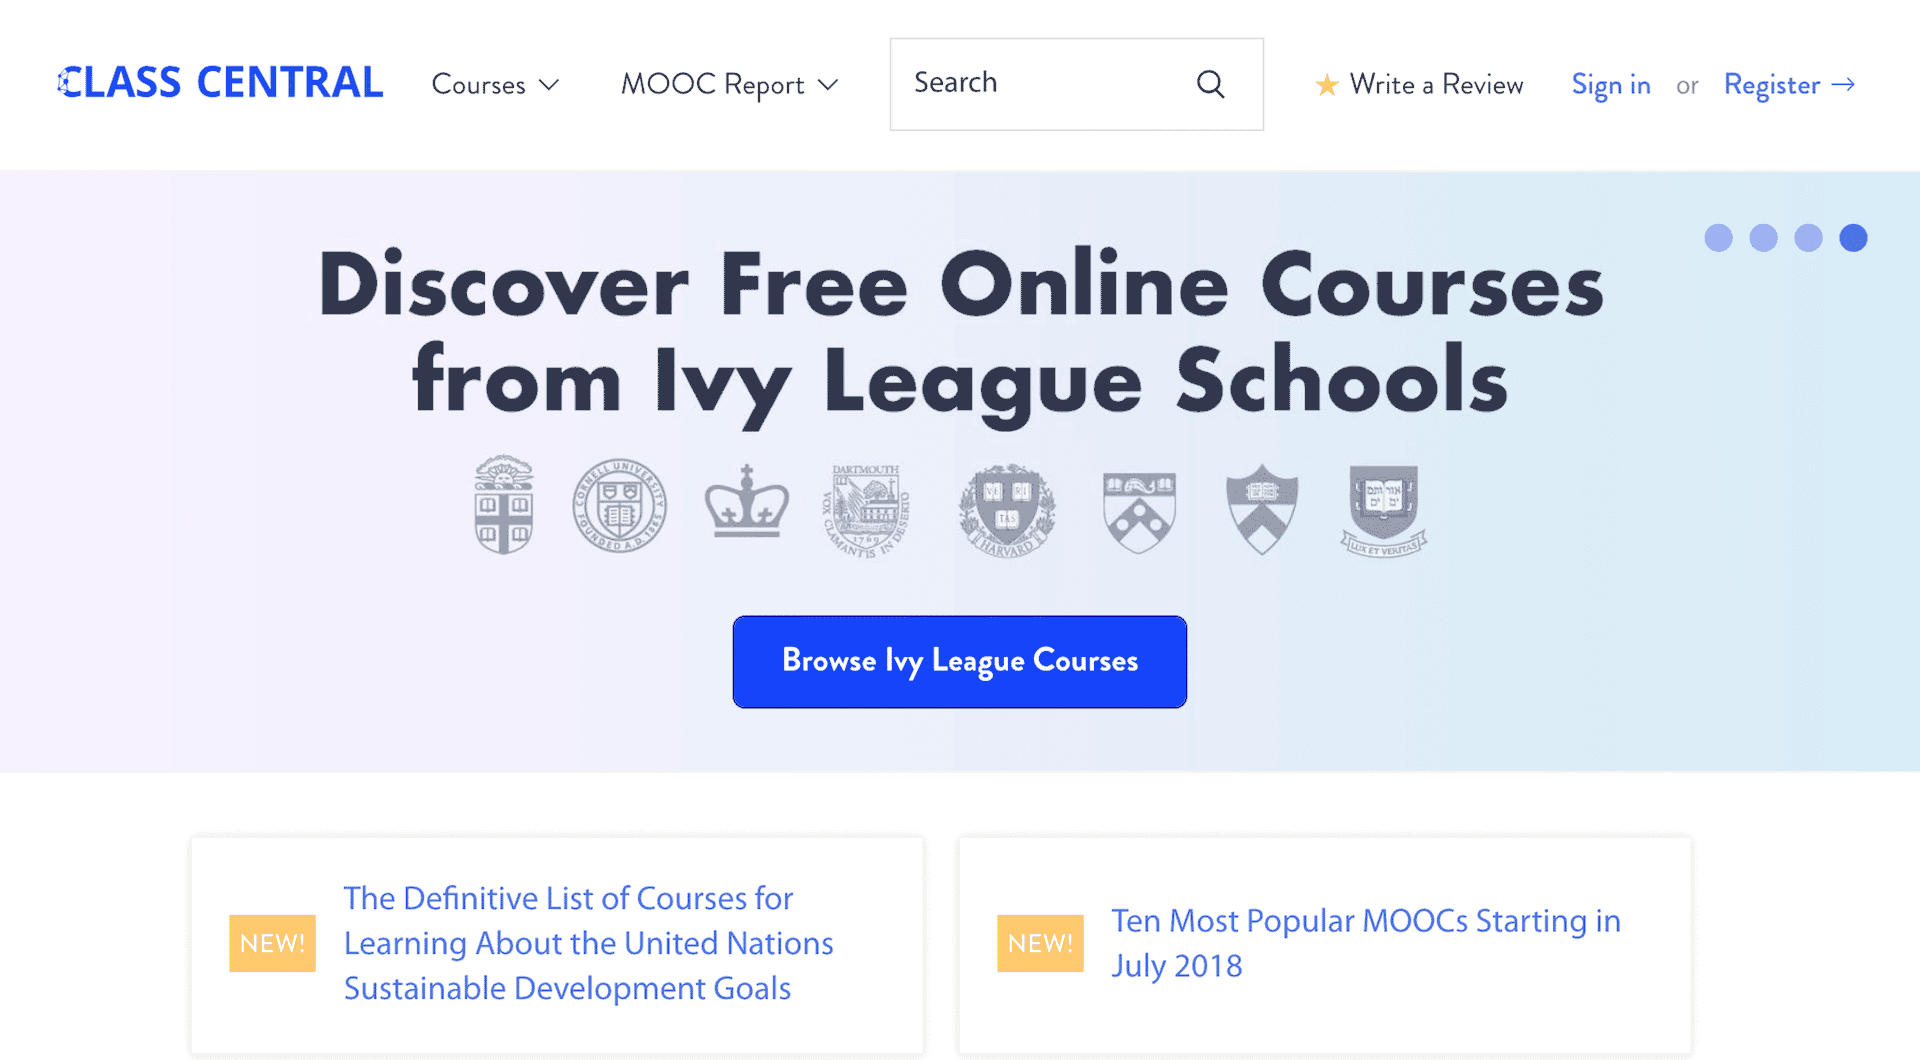 Search for free MOOCs on Class Central.